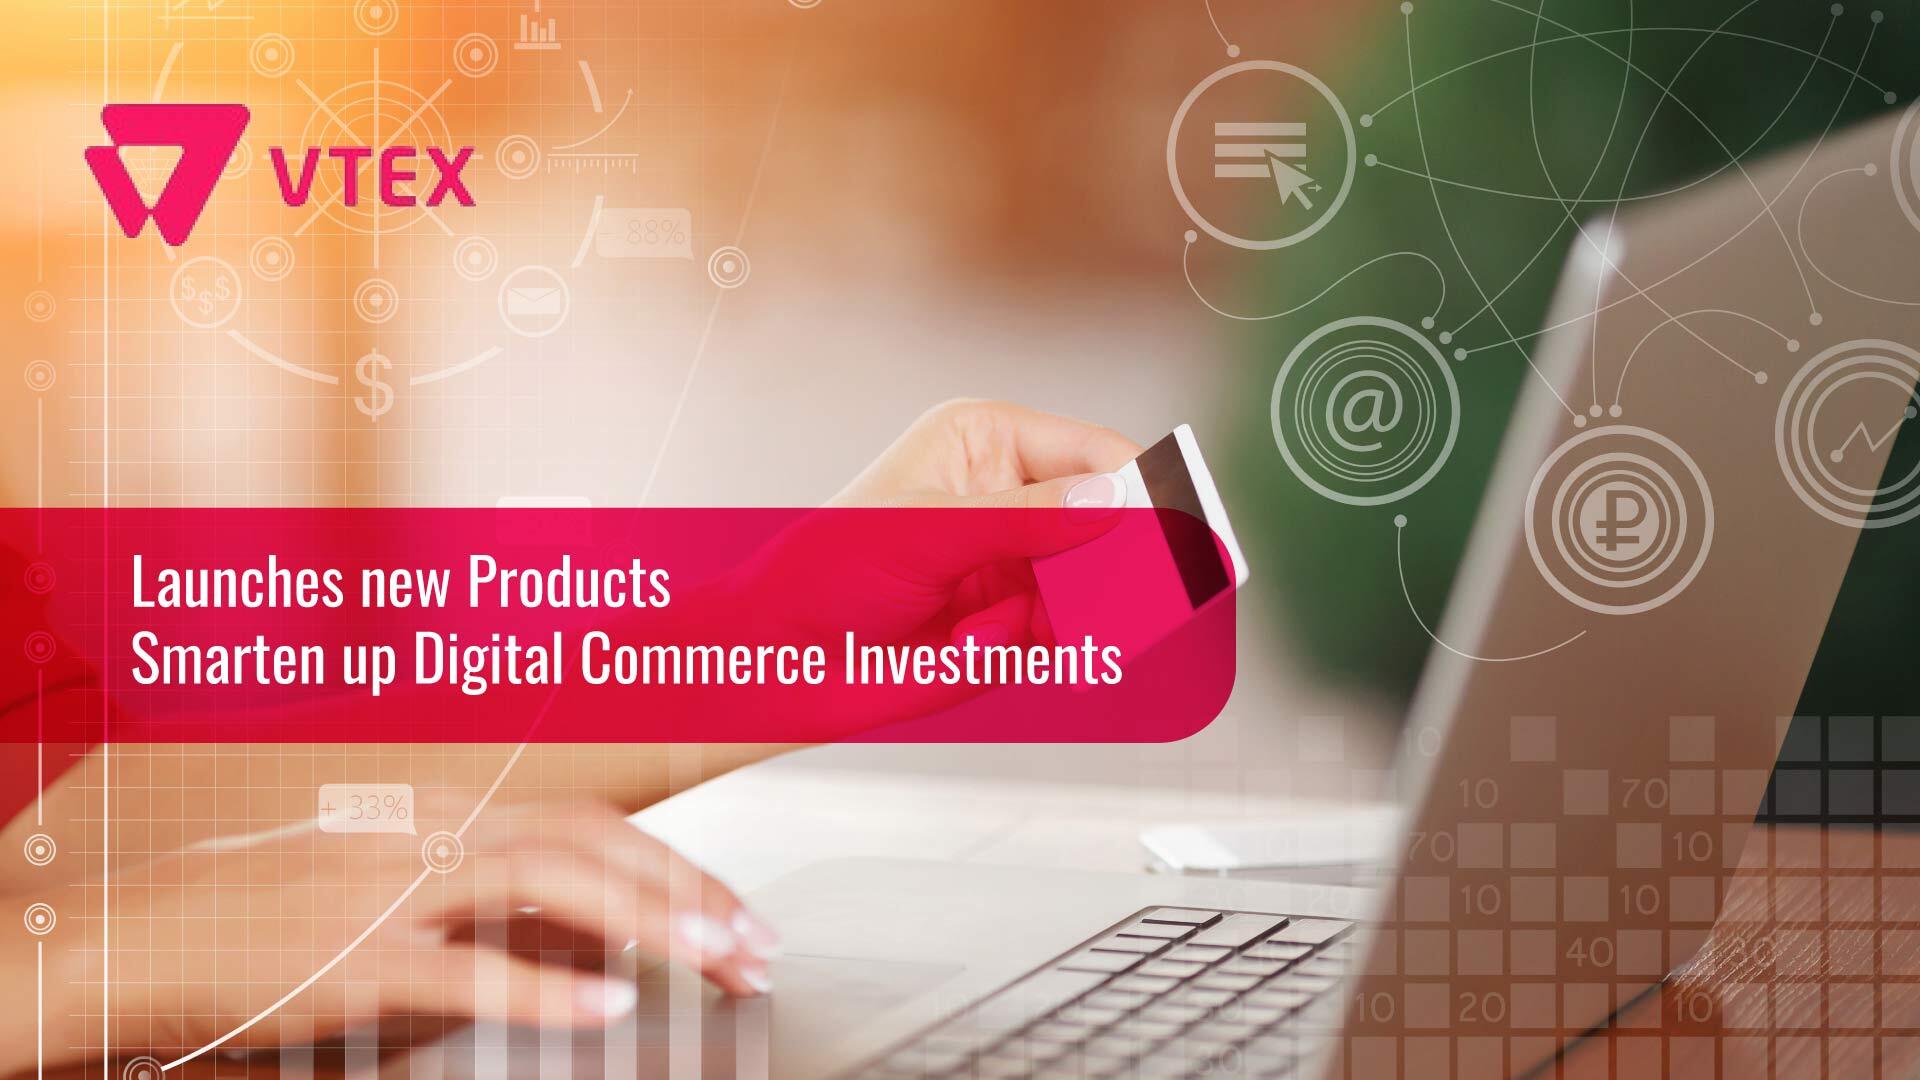 VTEX launches new products that smarten up digital commerce investments